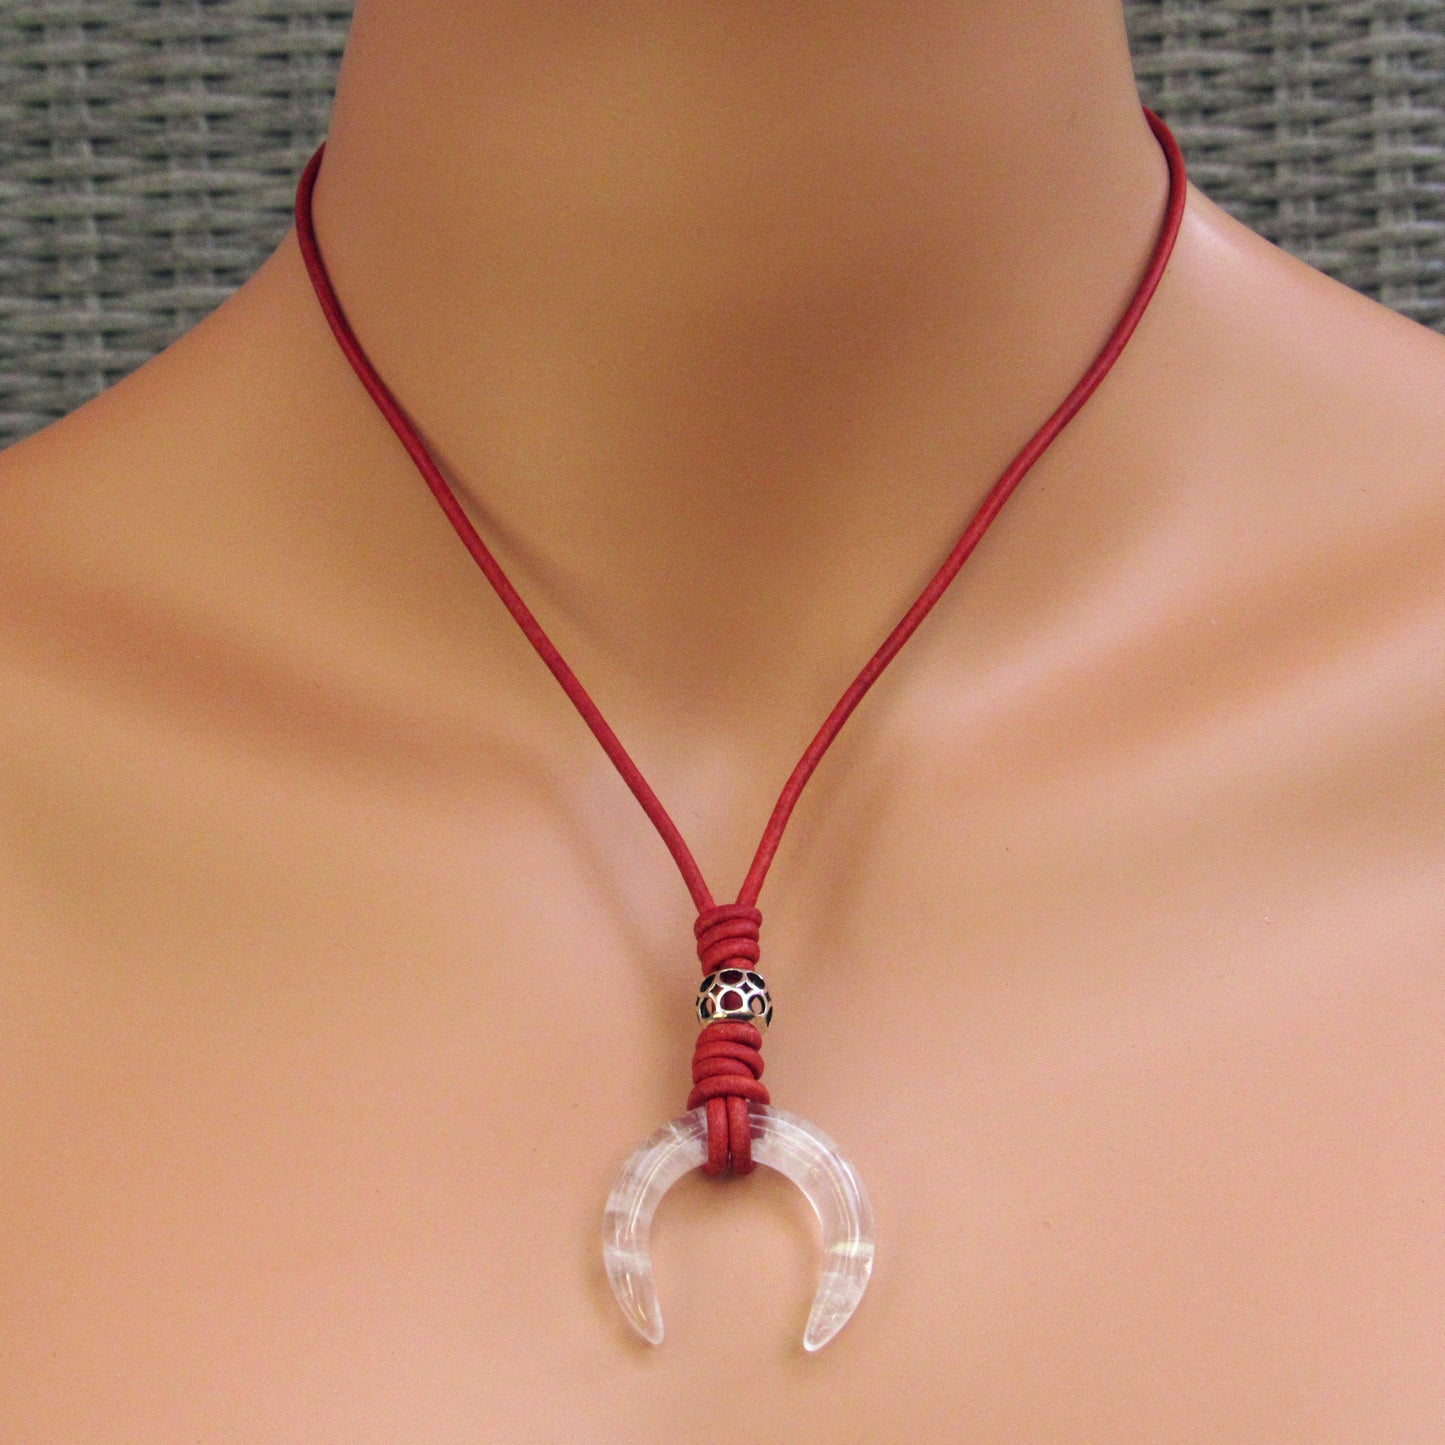 Women's Leather and Gemstone neckalces with silver accents and findings